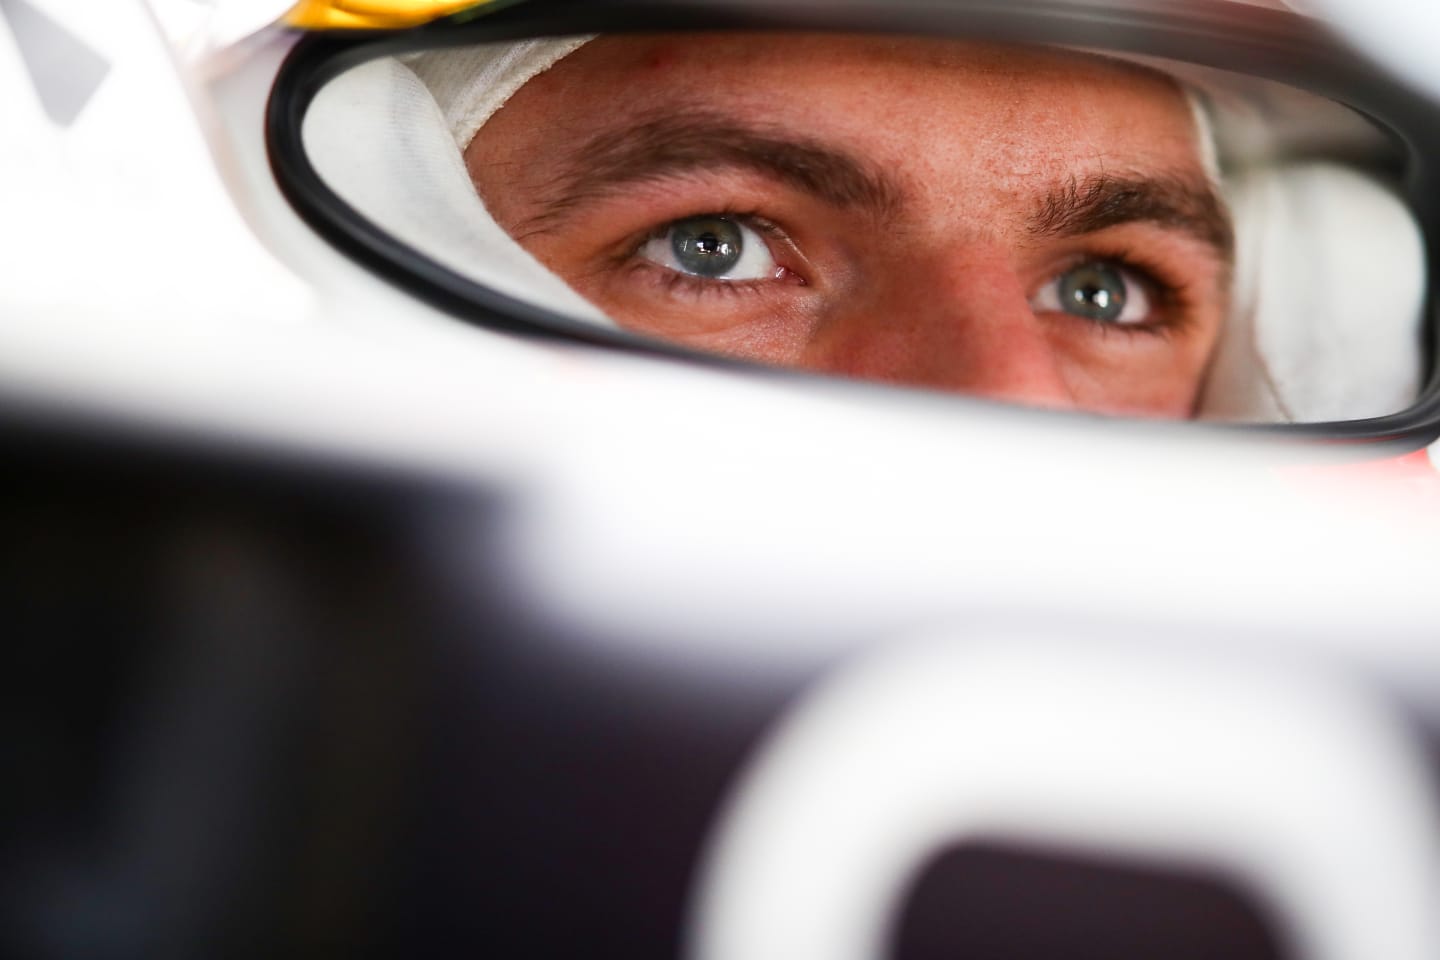 MEXICO CITY, MEXICO - NOVEMBER 06: Max Verstappen of Netherlands and Red Bull Racing prepares to drive in the garage during qualifying ahead of the F1 Grand Prix of Mexico at Autodromo Hermanos Rodriguez on November 06, 2021 in Mexico City, Mexico. (Photo by Mark Thompson/Getty Images)